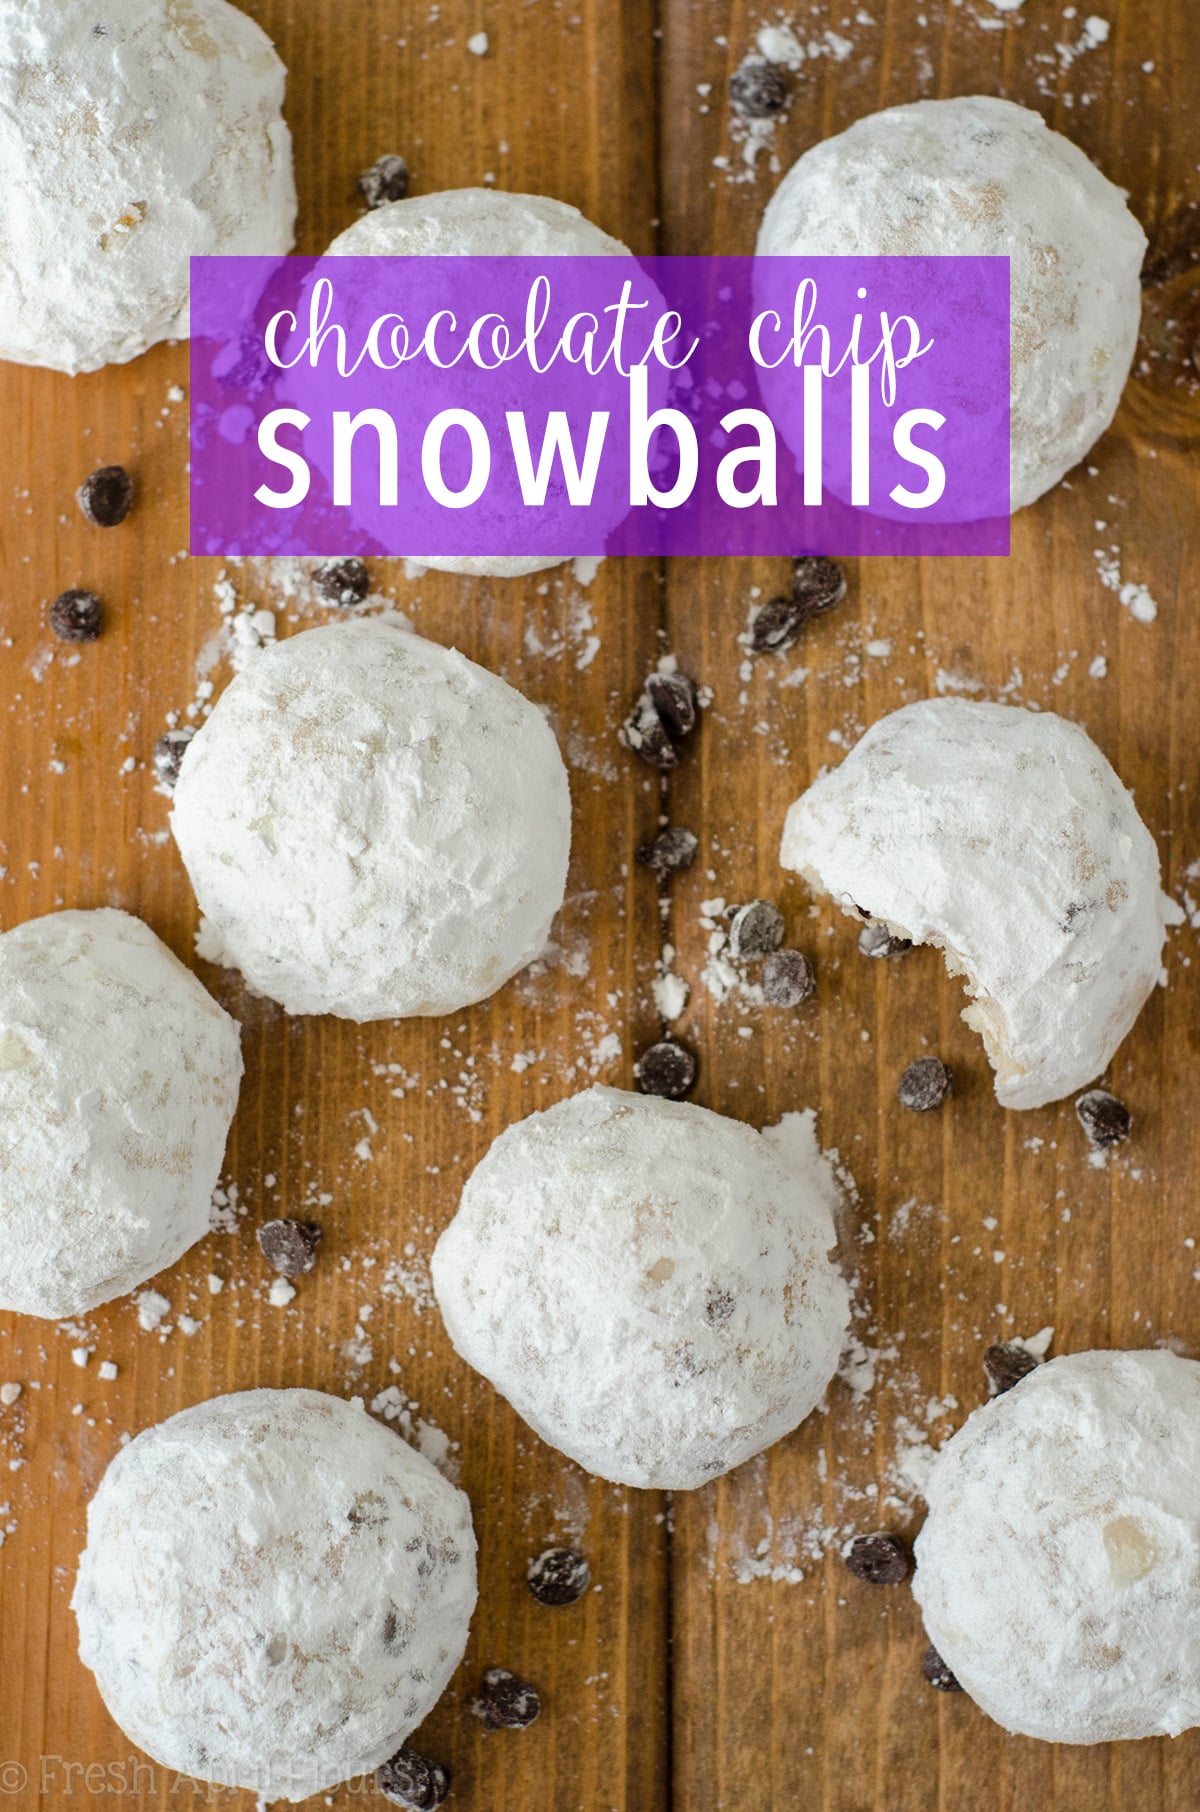 Chocolate Chip Snowballs: Buttery, melt-in-your-mouth shortbread cookies filled with mini-chocolate chips and rolled in powdered sugar. via @frshaprilflours